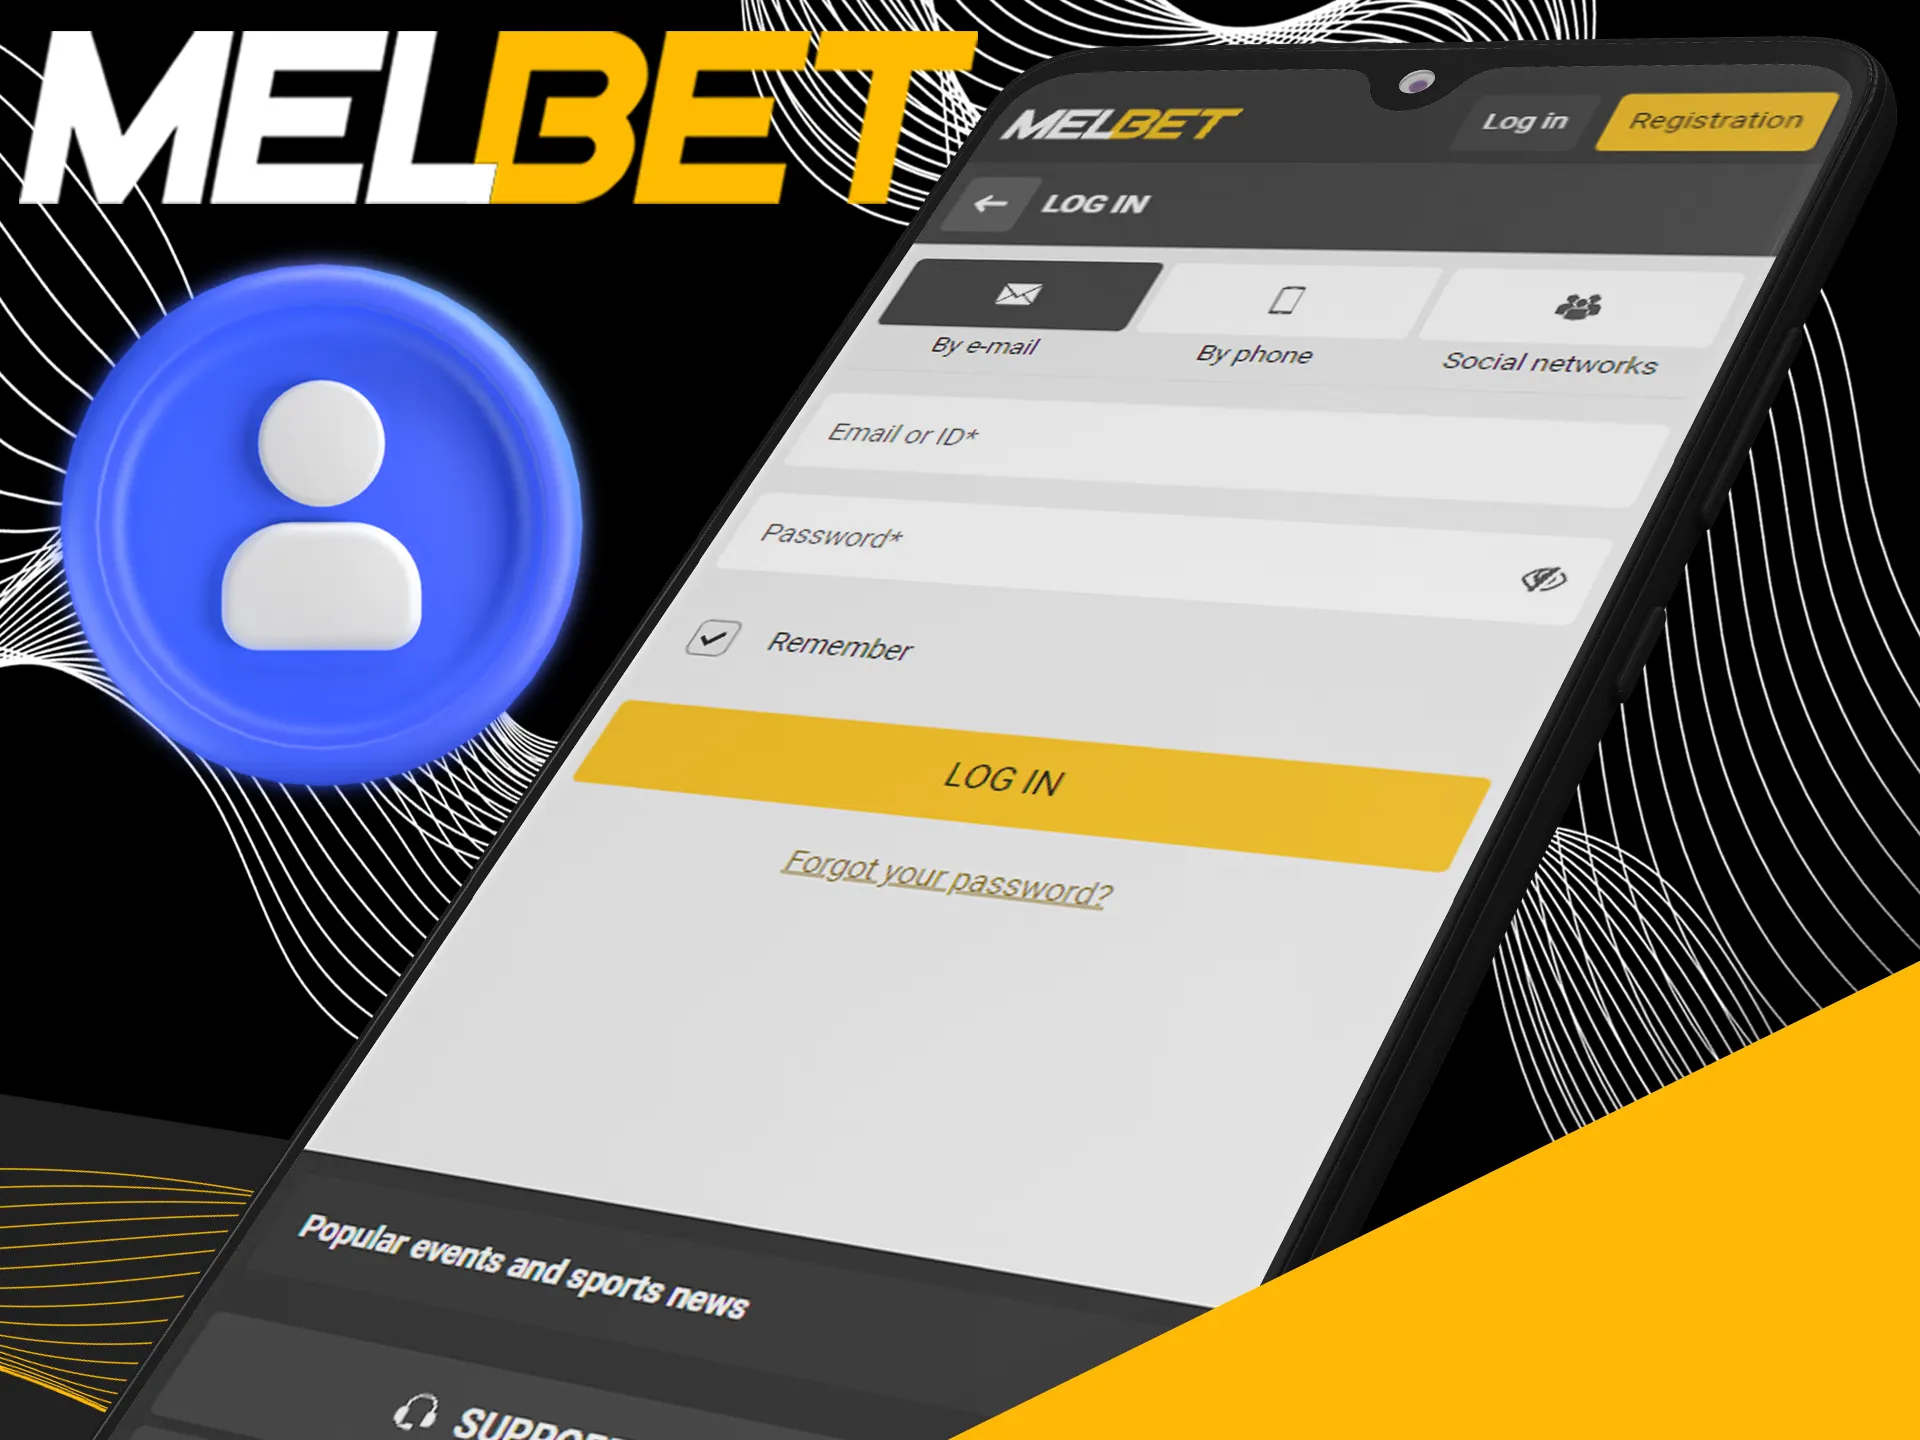 Top 10 Betting Sites in Bangladesh